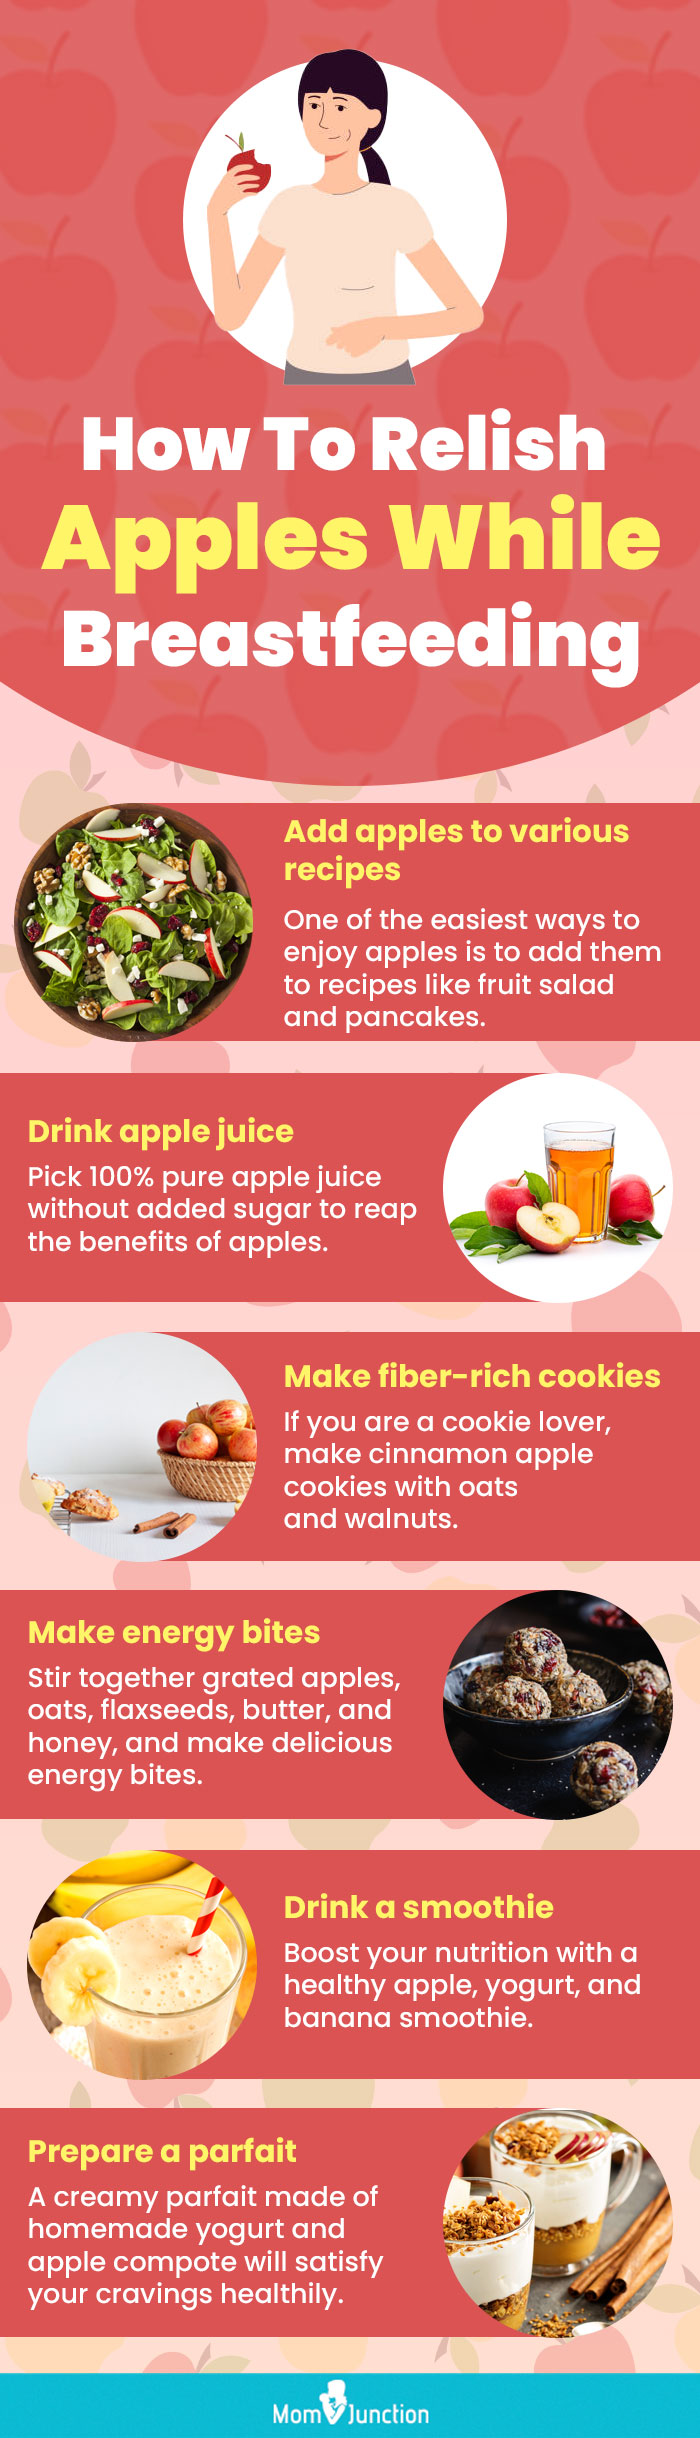 how to relish apples while breastfeeding (infographic)